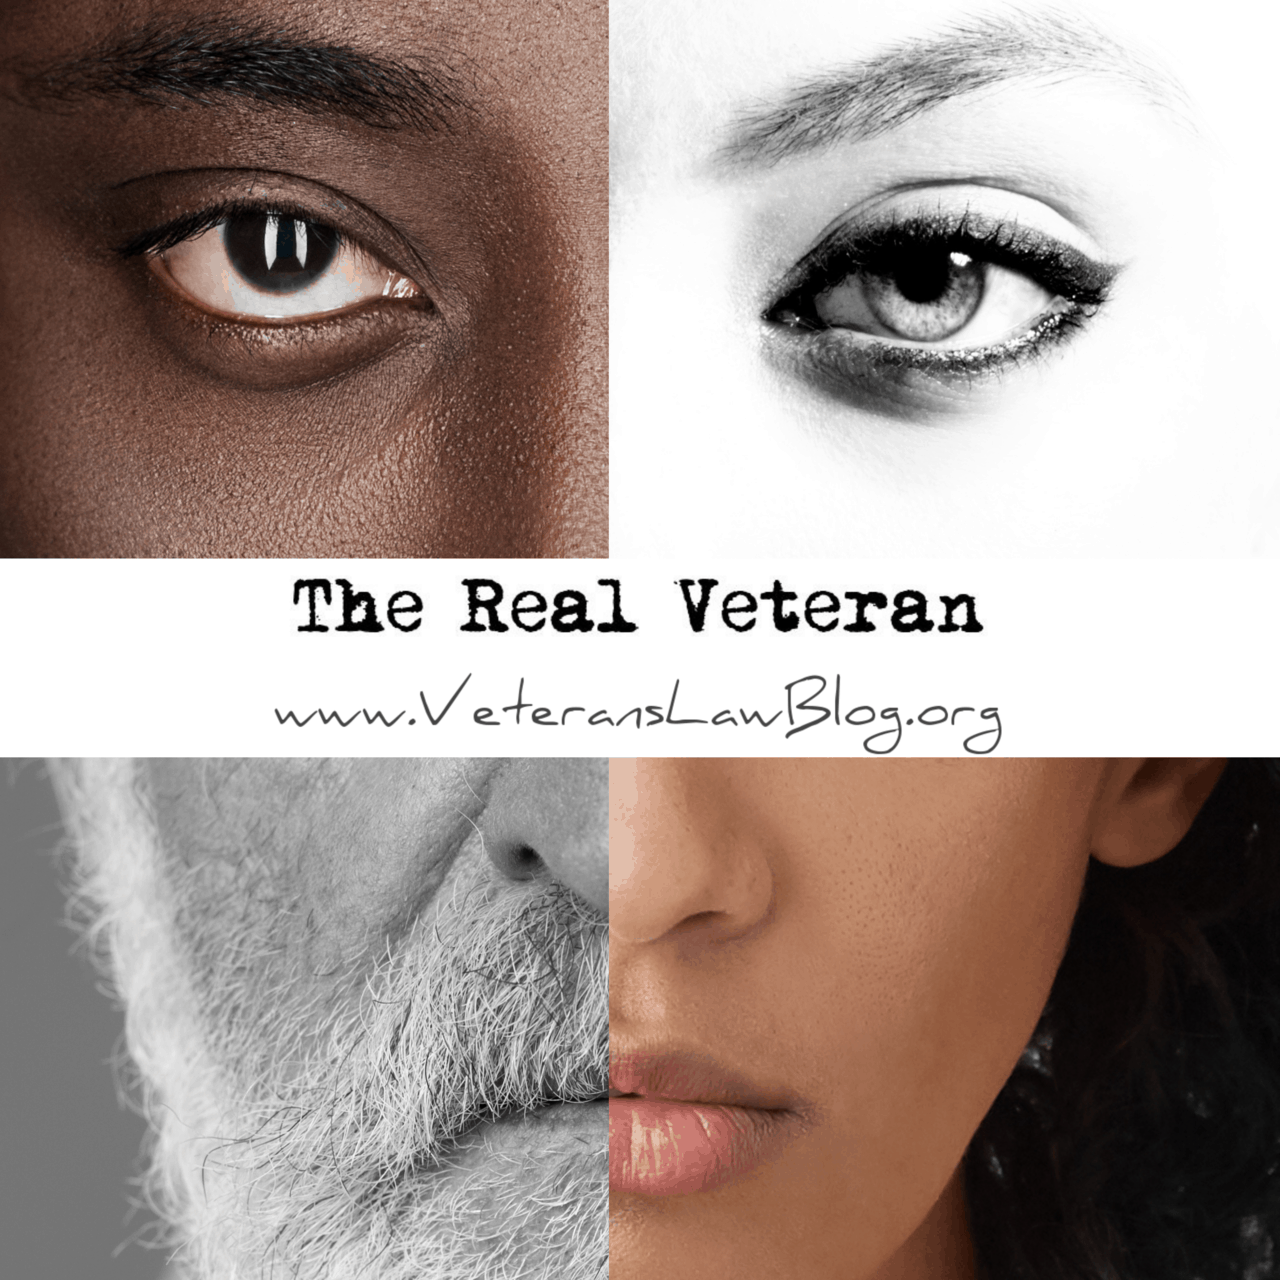 What is a Real Veteran?